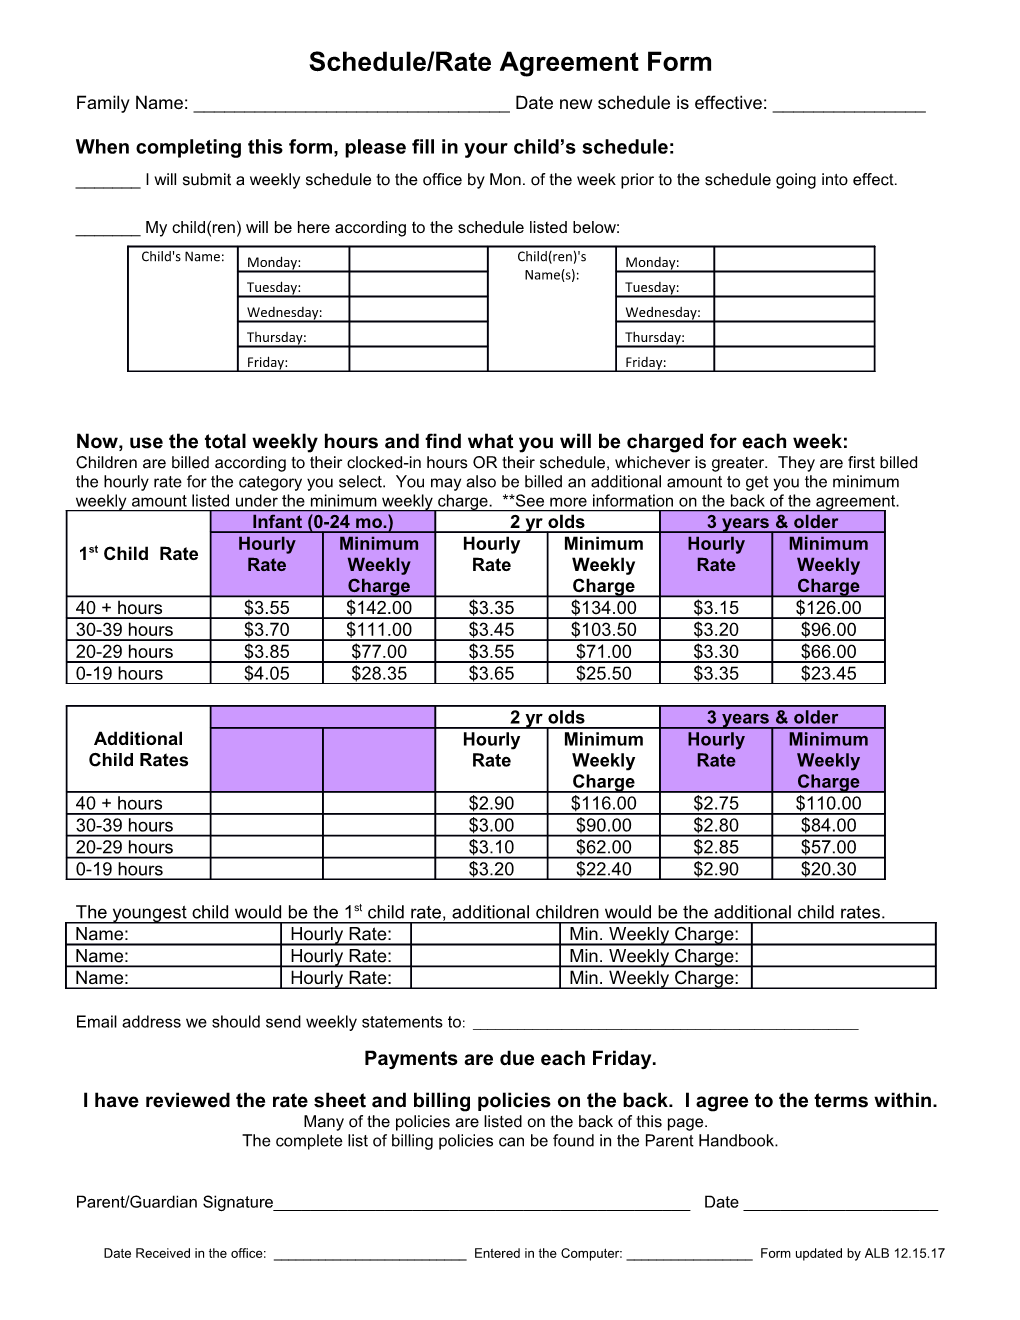 Schedule/Rate Agreement Form